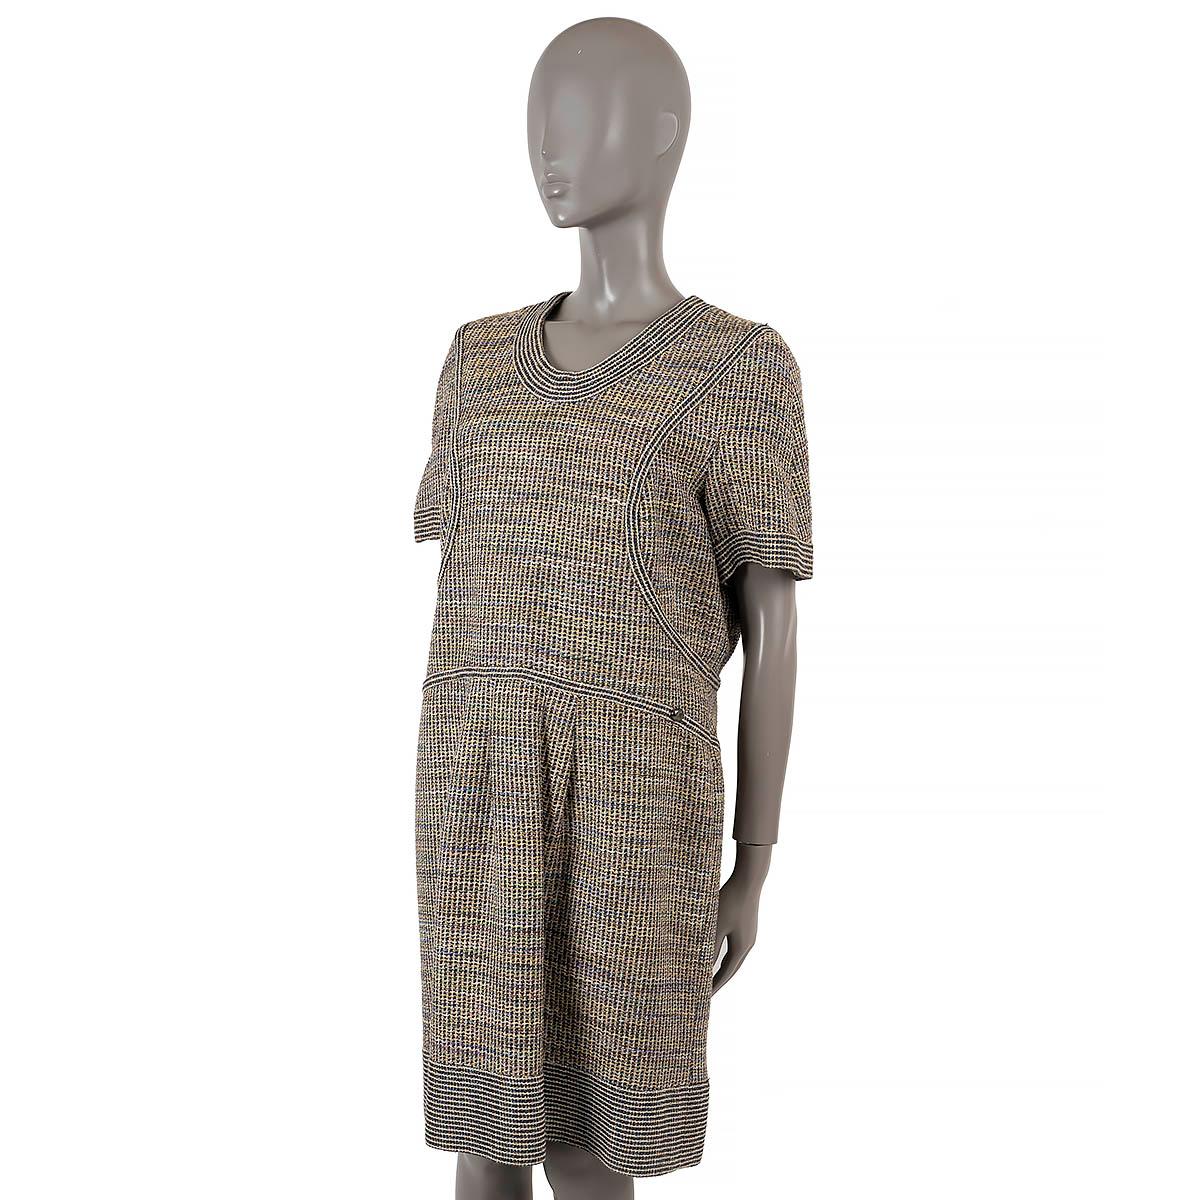 100% authentic Chanel tweed sheath dress black and white acrylic (44%), cotton (43%), acetate (10%), polyester (1%), polyamide (1%)and polyester (1%) with multicolor color and blue lurex details. Features short sleeves, box pleated skirt, striped